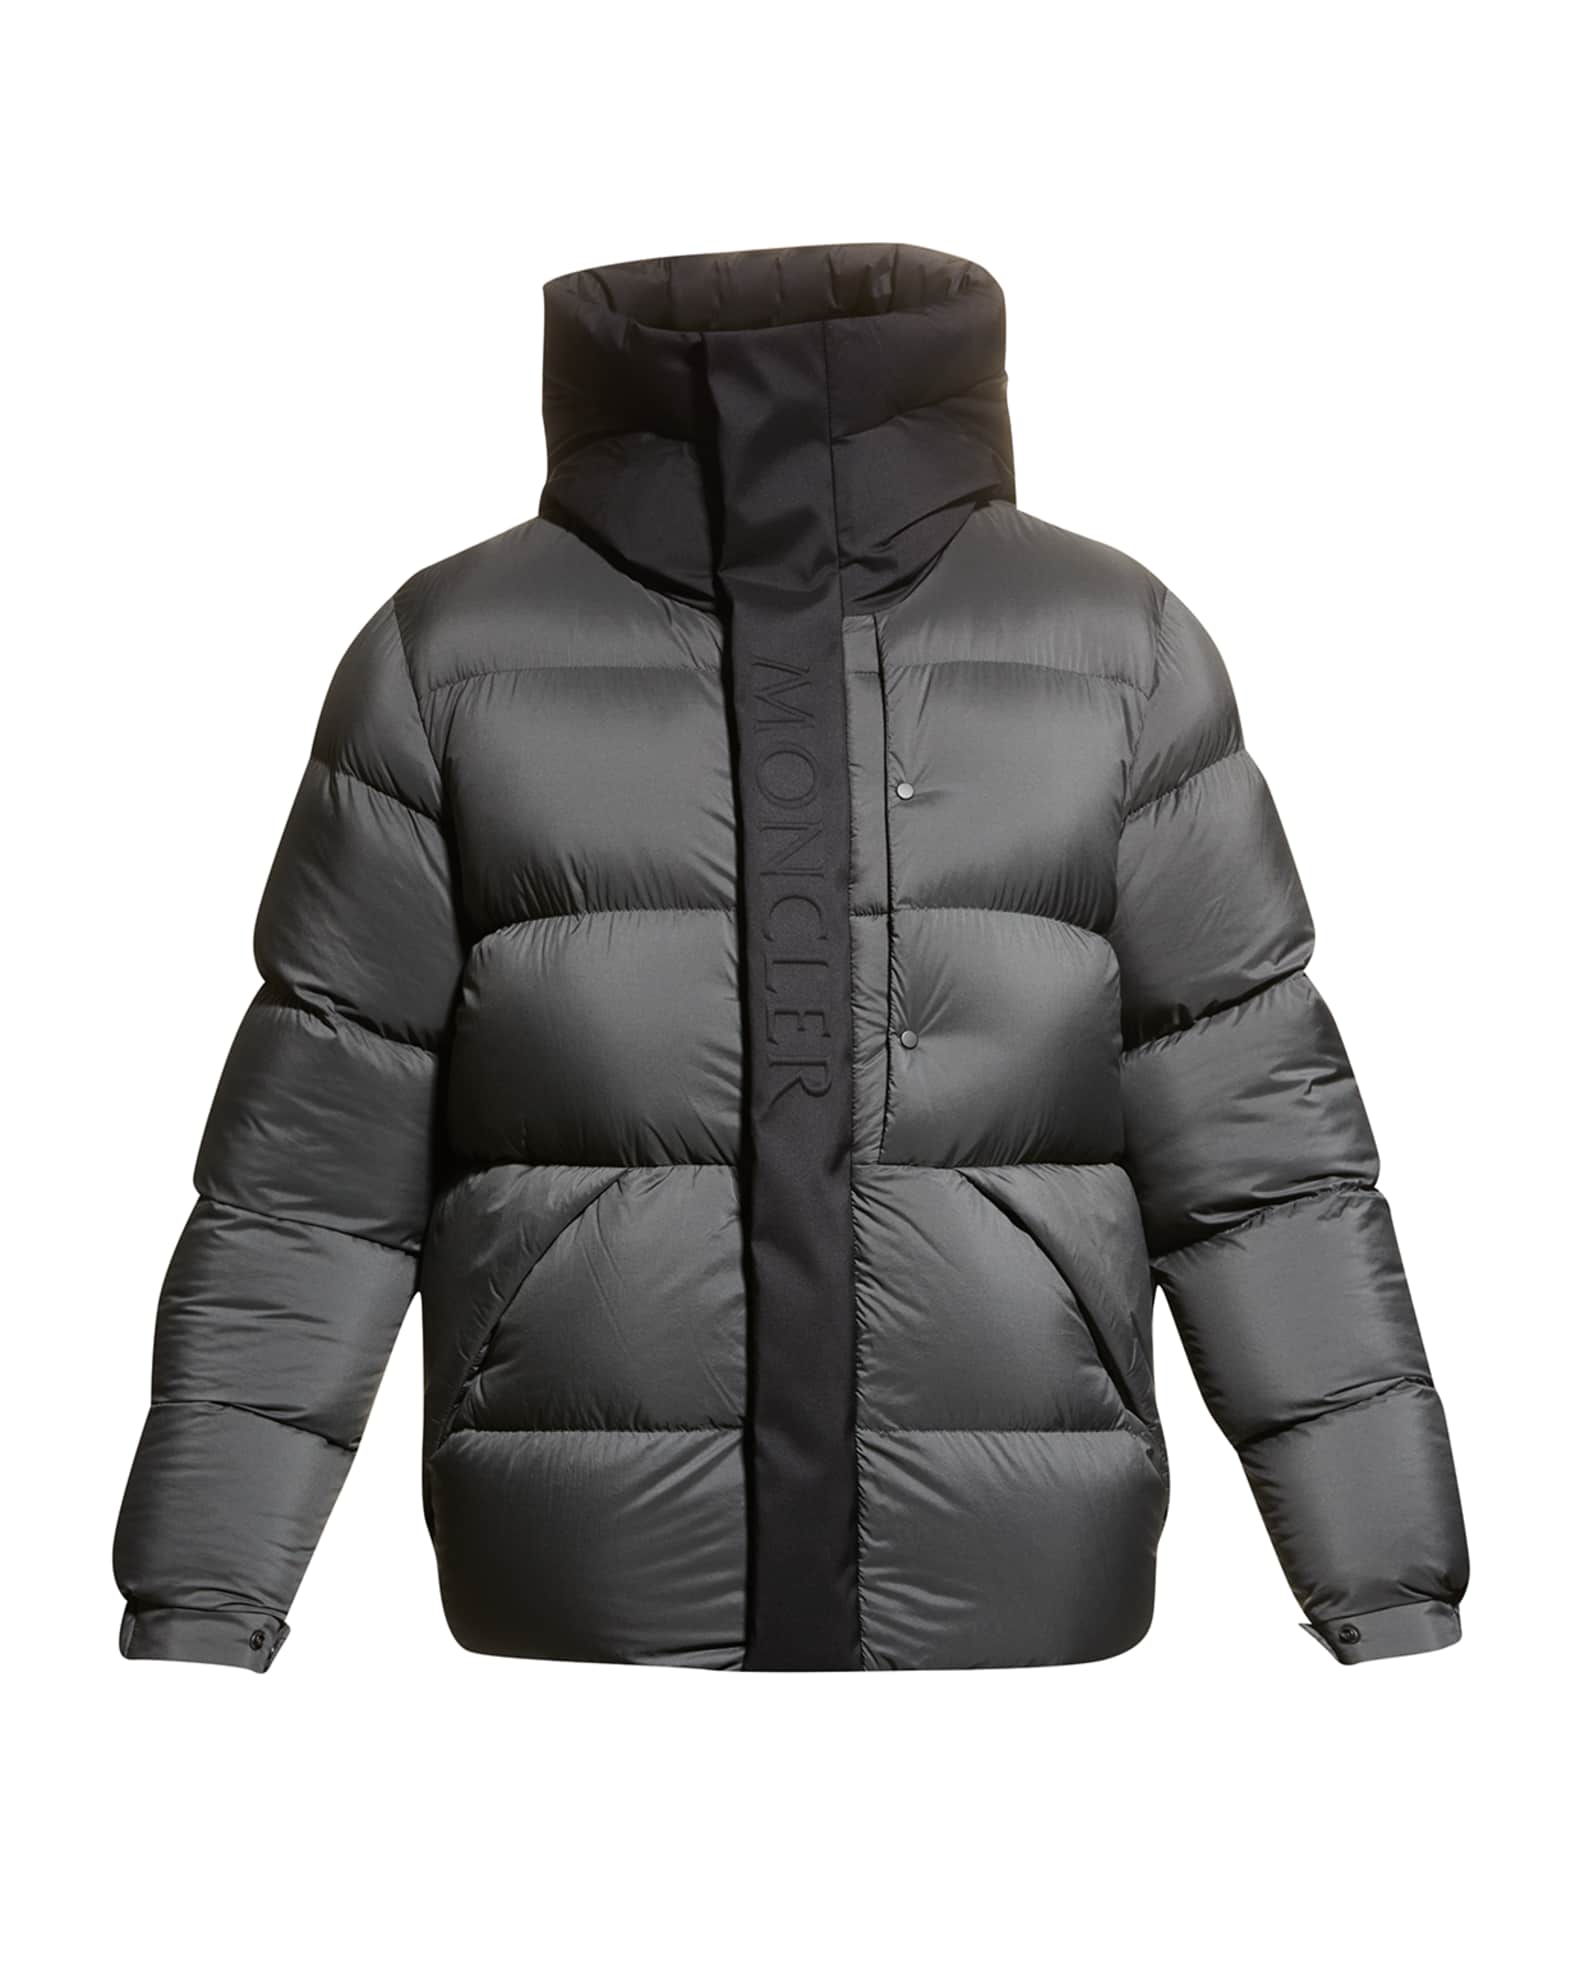 Moncler Madeira Puffer Jacket in Dark_grey Mens Clothing Jackets Casual jackets Black for Men 